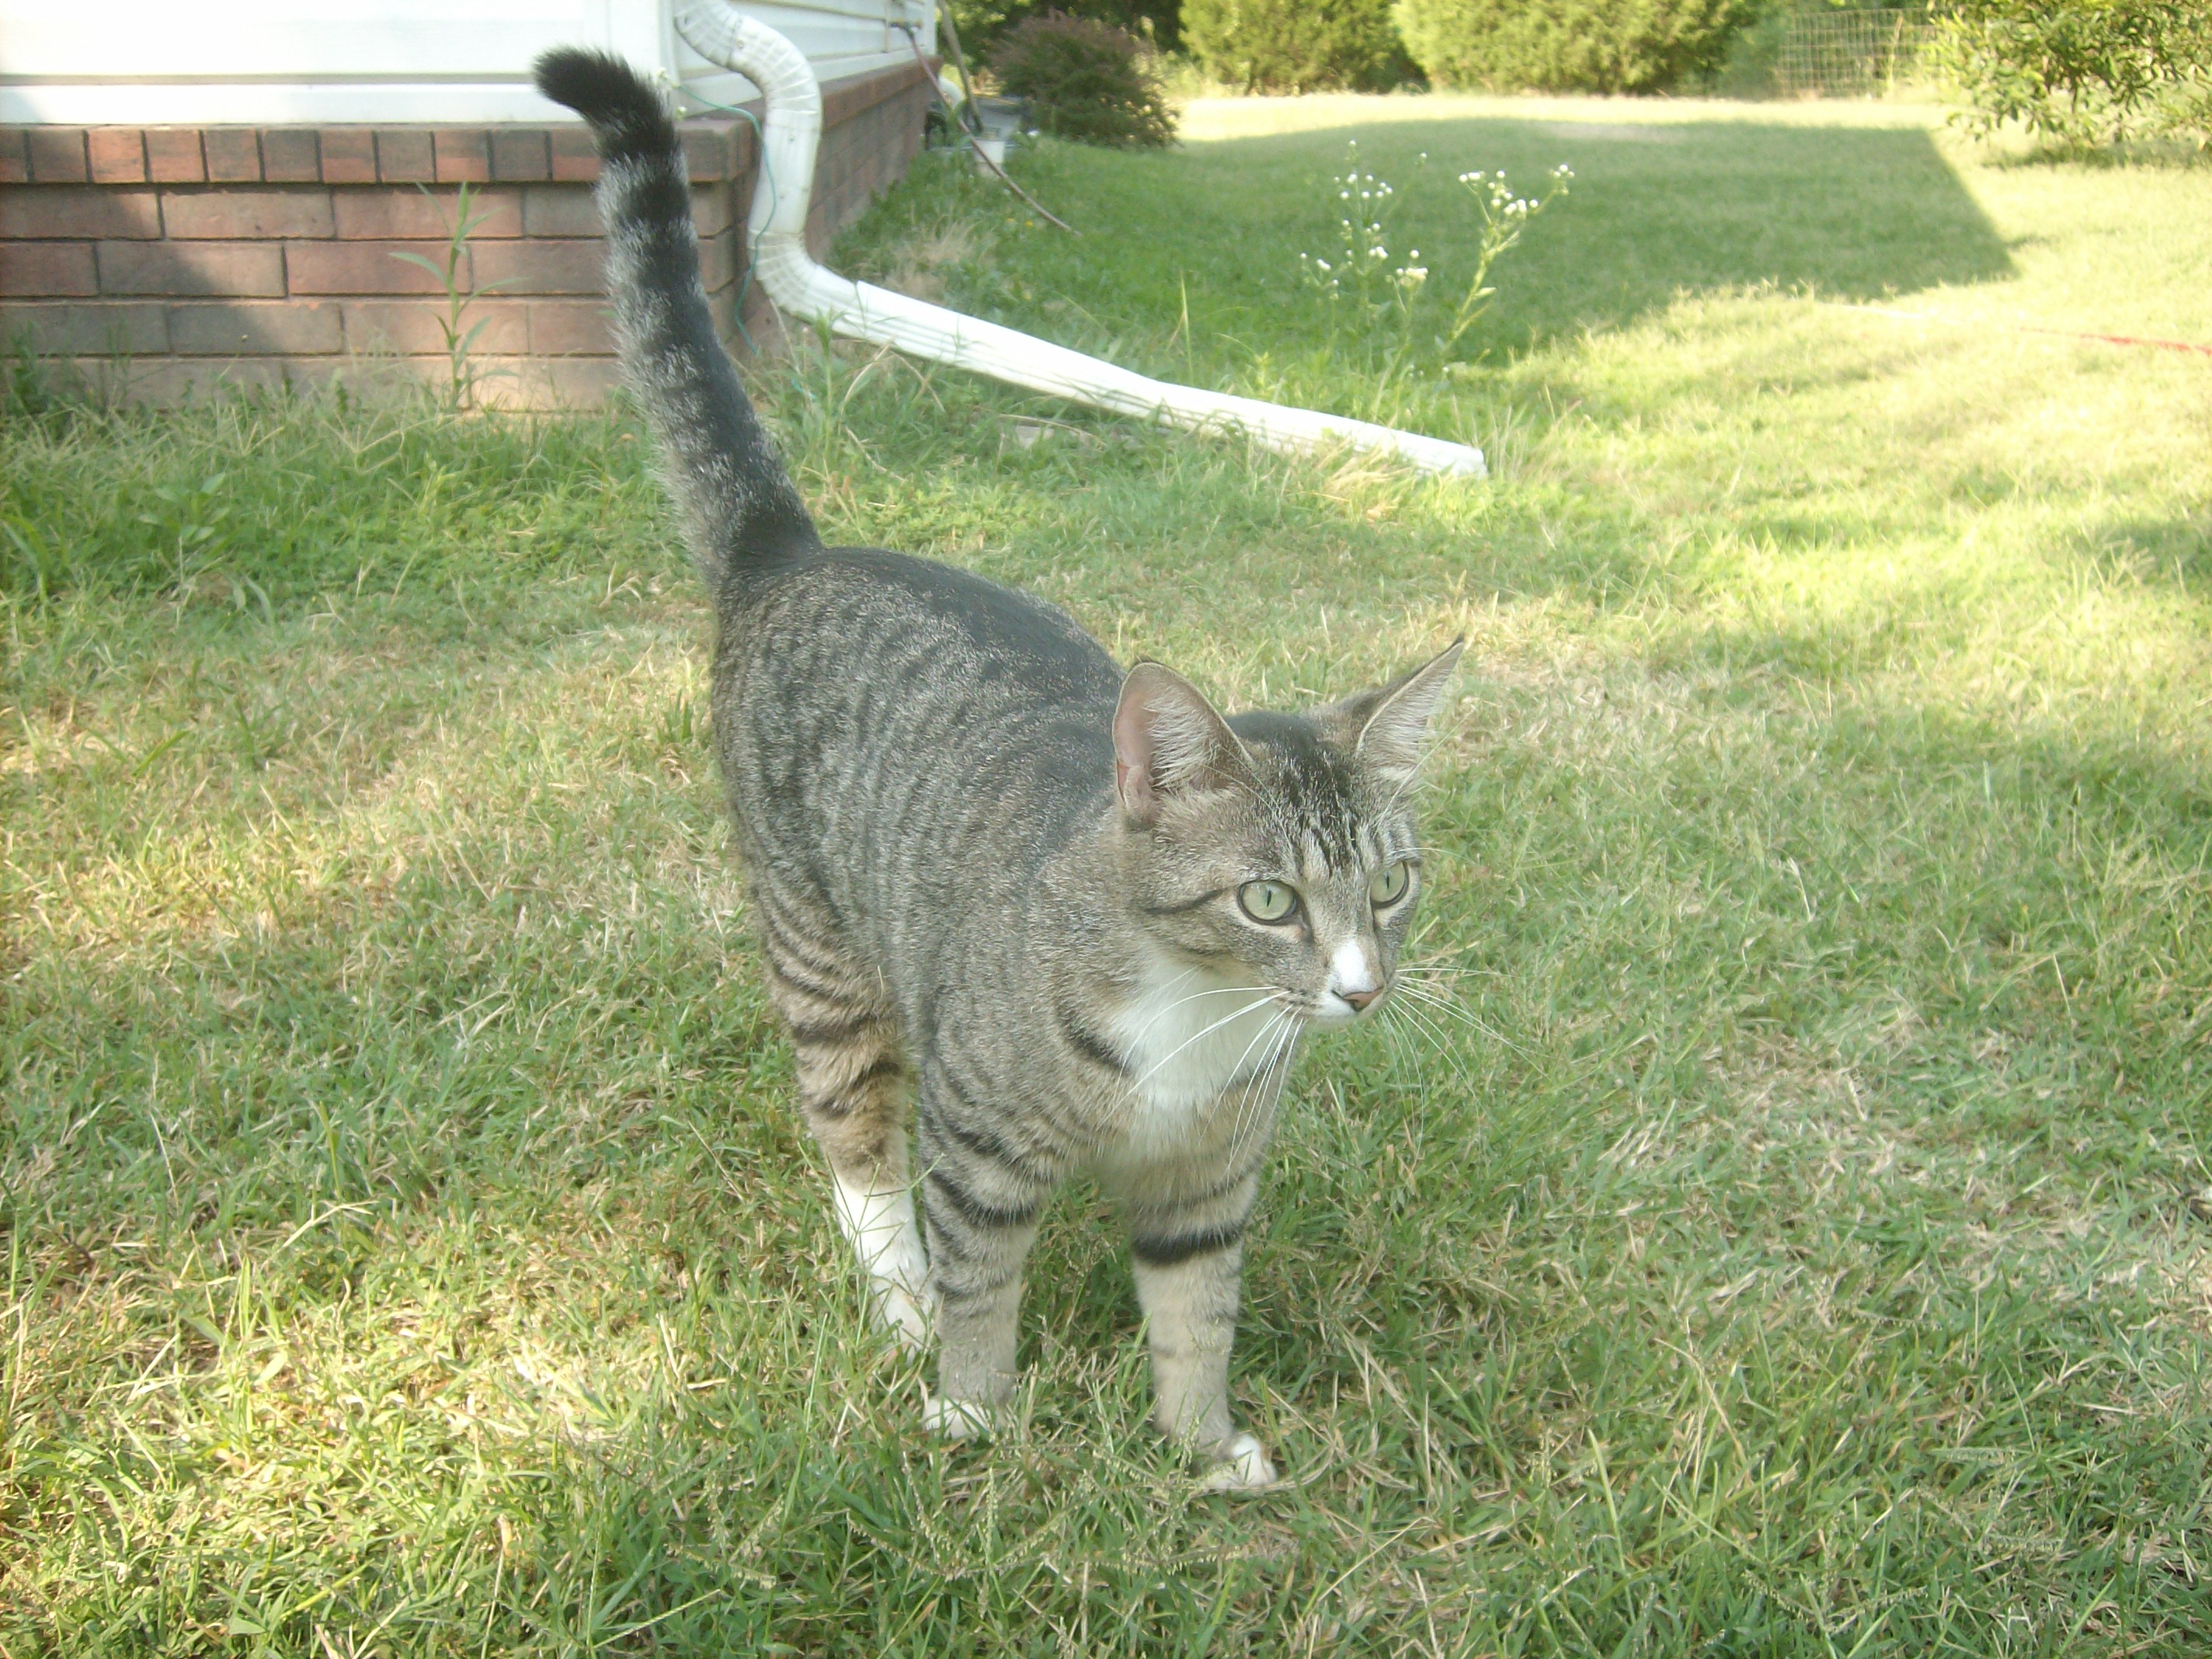 Franny.  a.k.a.  Franchesca
Youngest member of the cat herd.  Favorite hobbies include patroling the front yard for Robins and exterminating lizards from the front porch and flower beds.